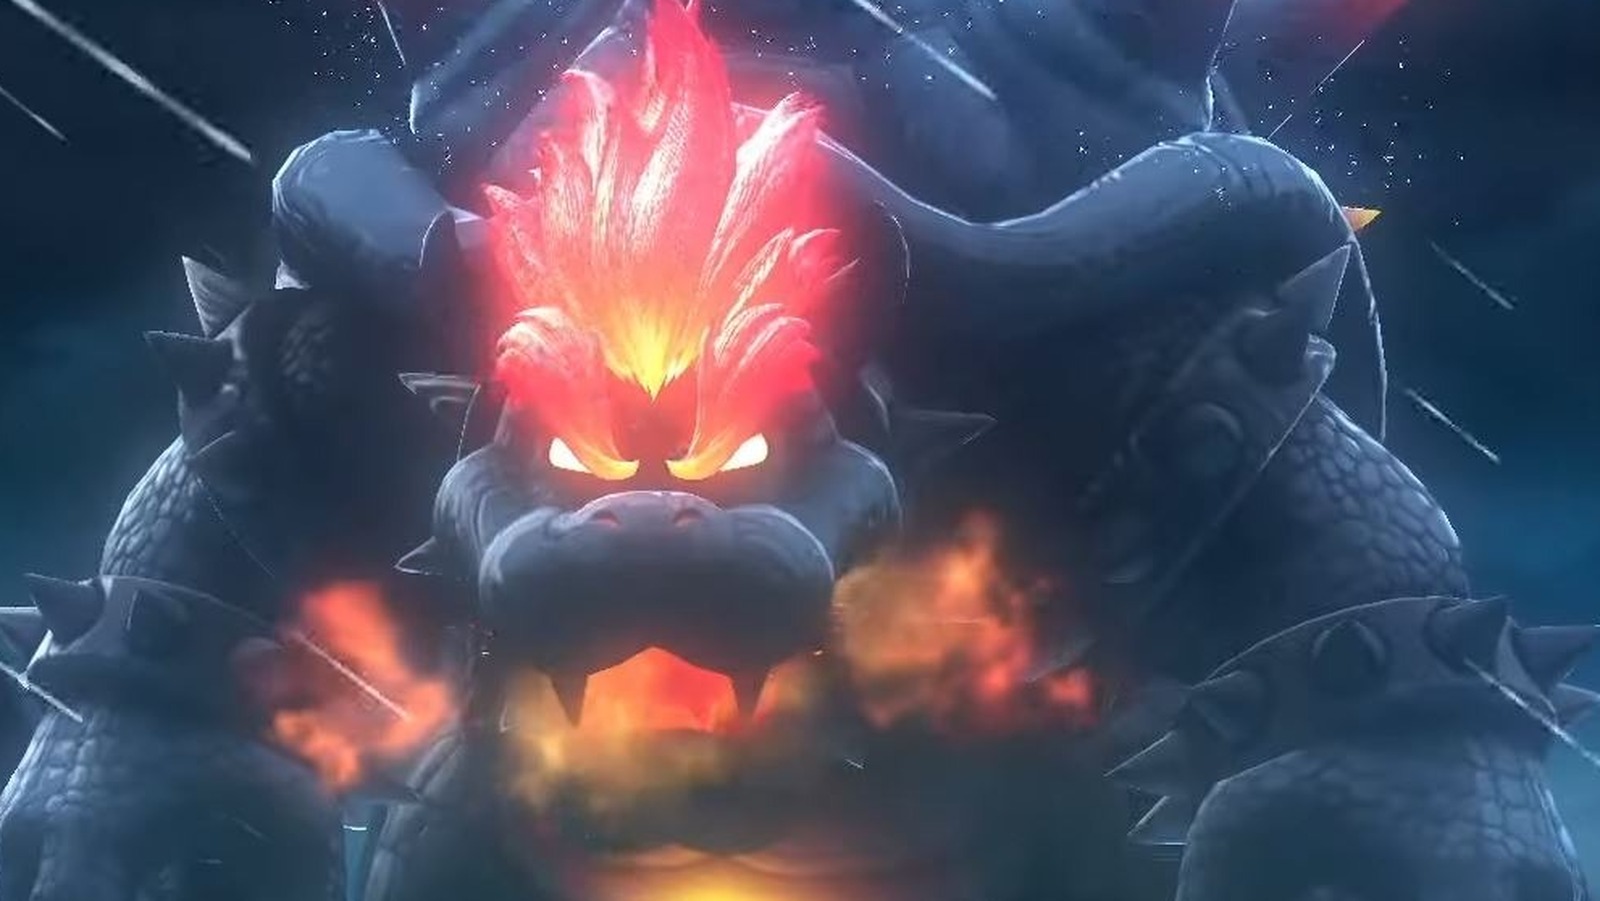 Bowser's Fury 2: When Will We Get A Sequel?